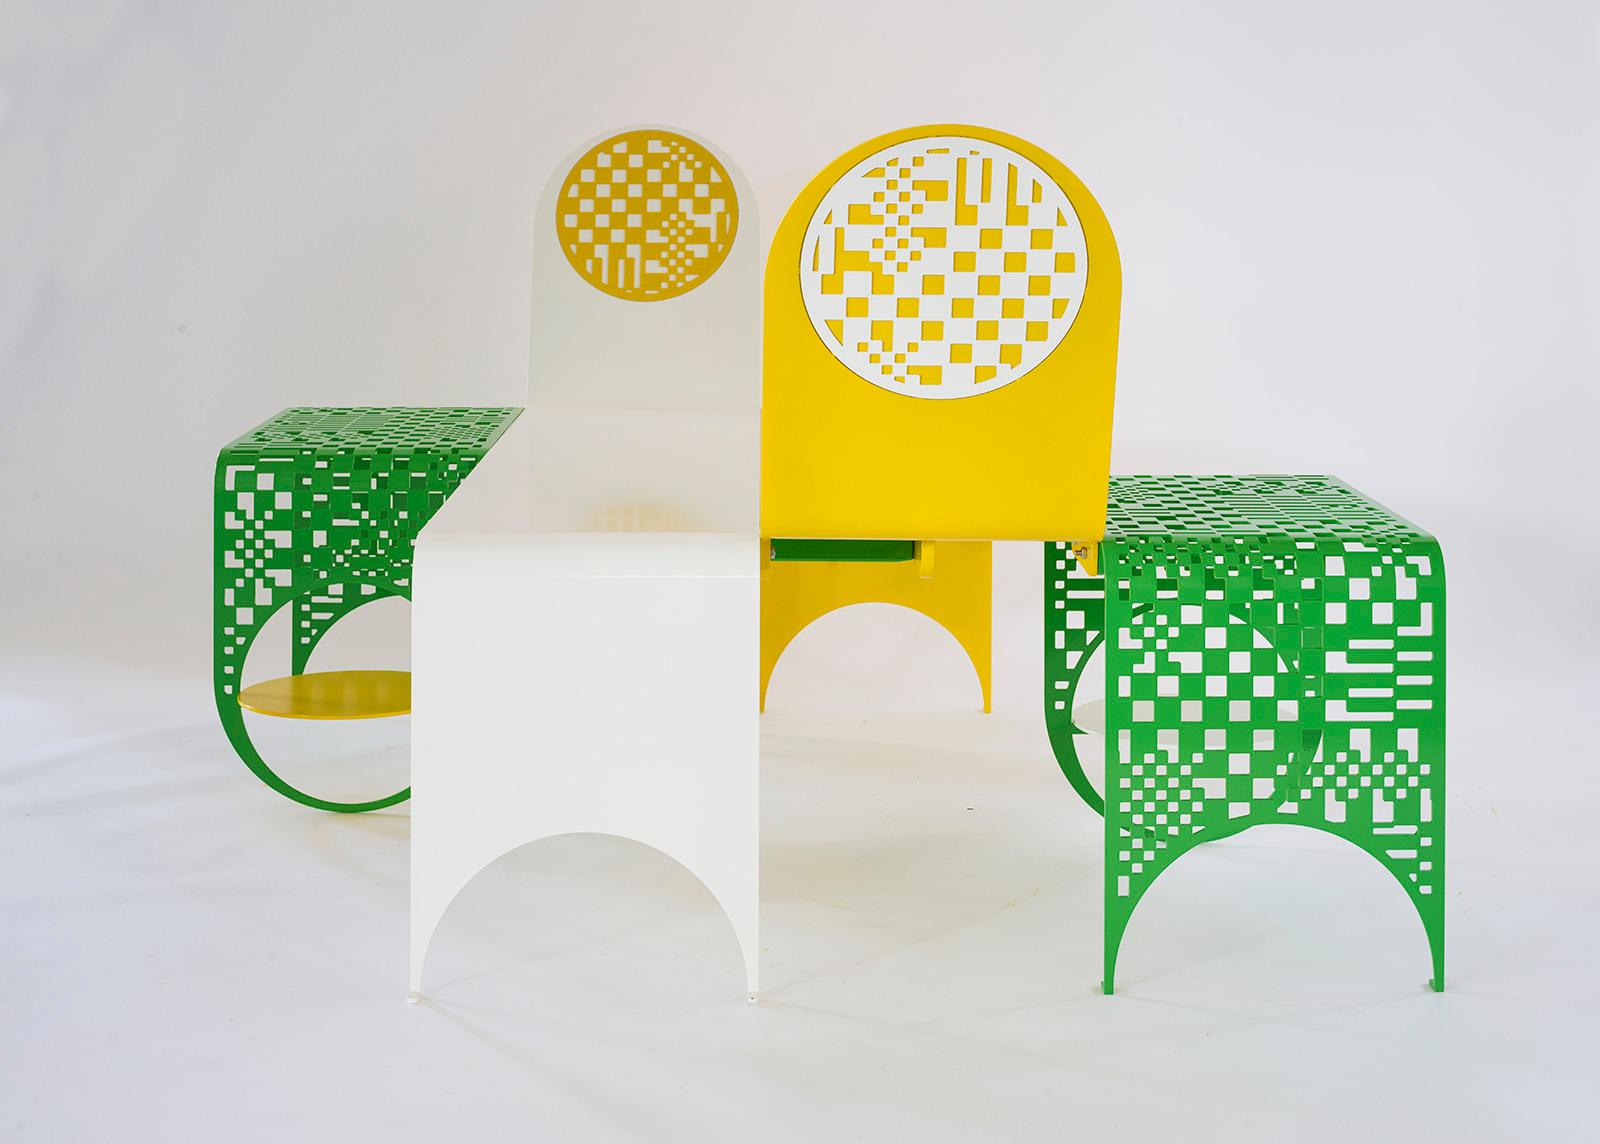 For their debut outdoor furniture collection Kin & Company, in collaboration with renowned textile designer Dusen Dusen, has created the Thin Check Chaise and Thin Check Table, a set of playful lounge chairs and side tables perforated using one of